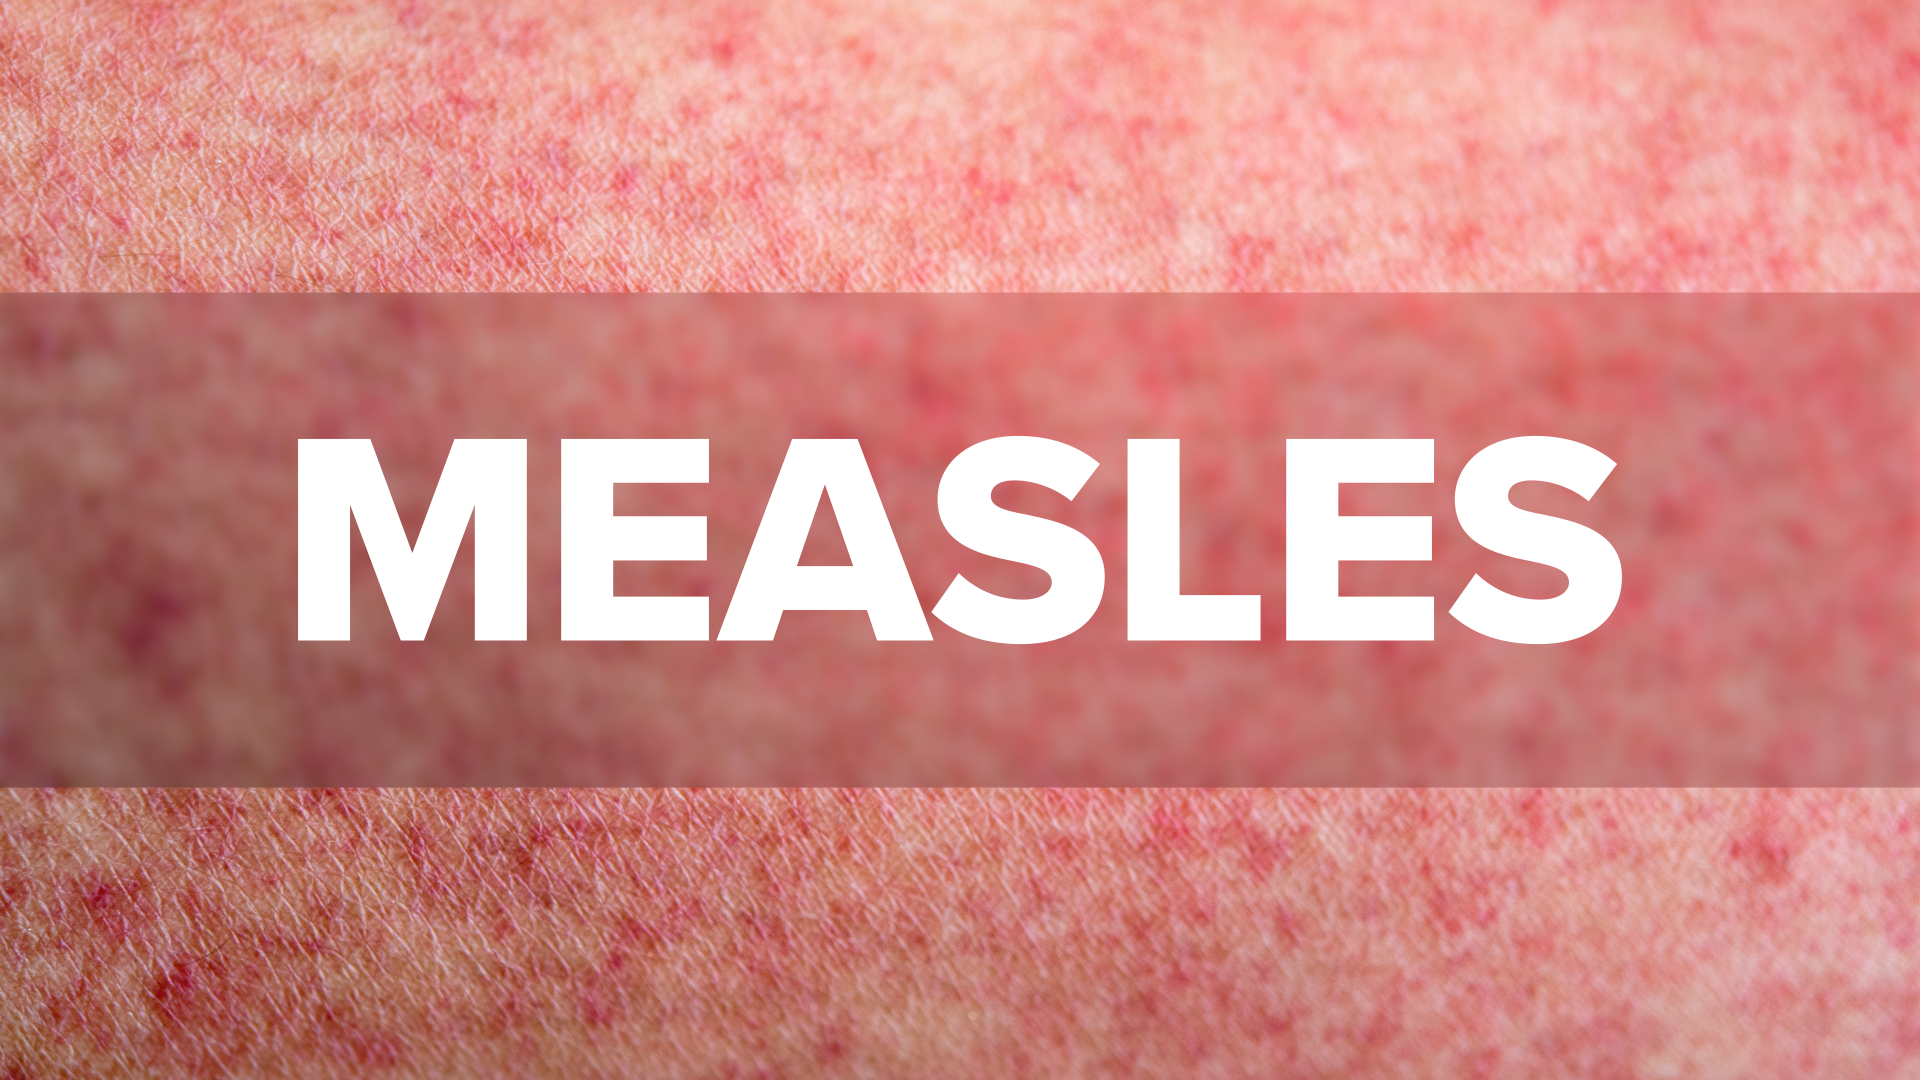 First measles case reported in Indiana in five years